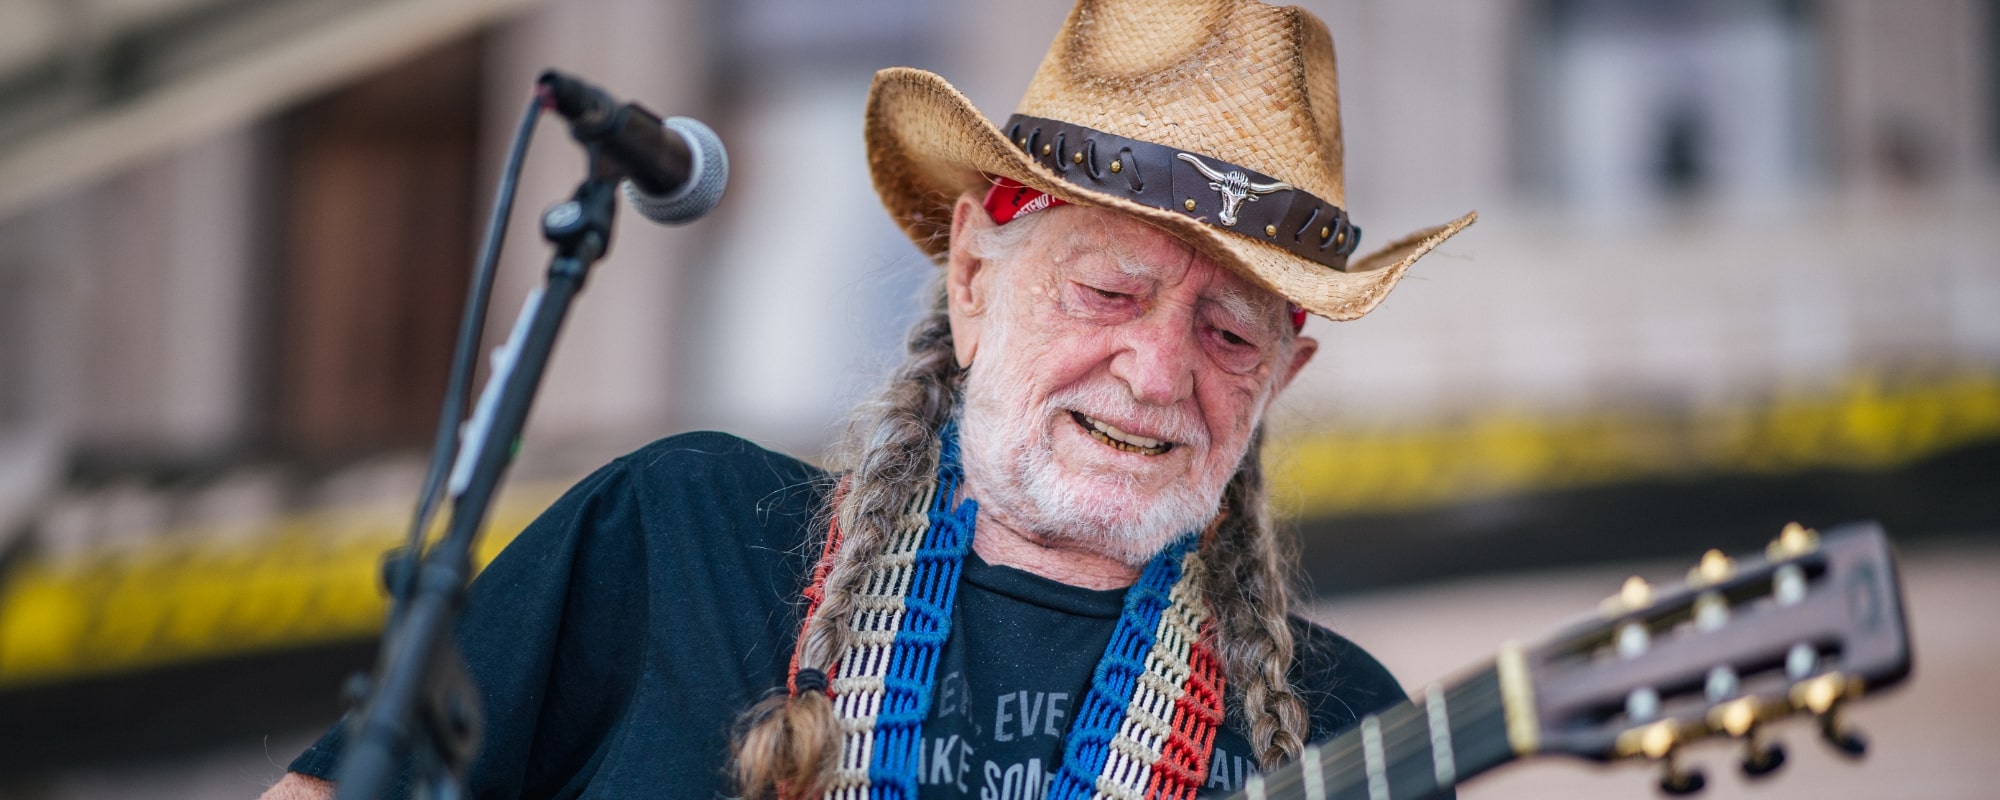 Willie Nelson “Keeps on Giving” With Hilarious Images from Movie With Kris Kristofferson